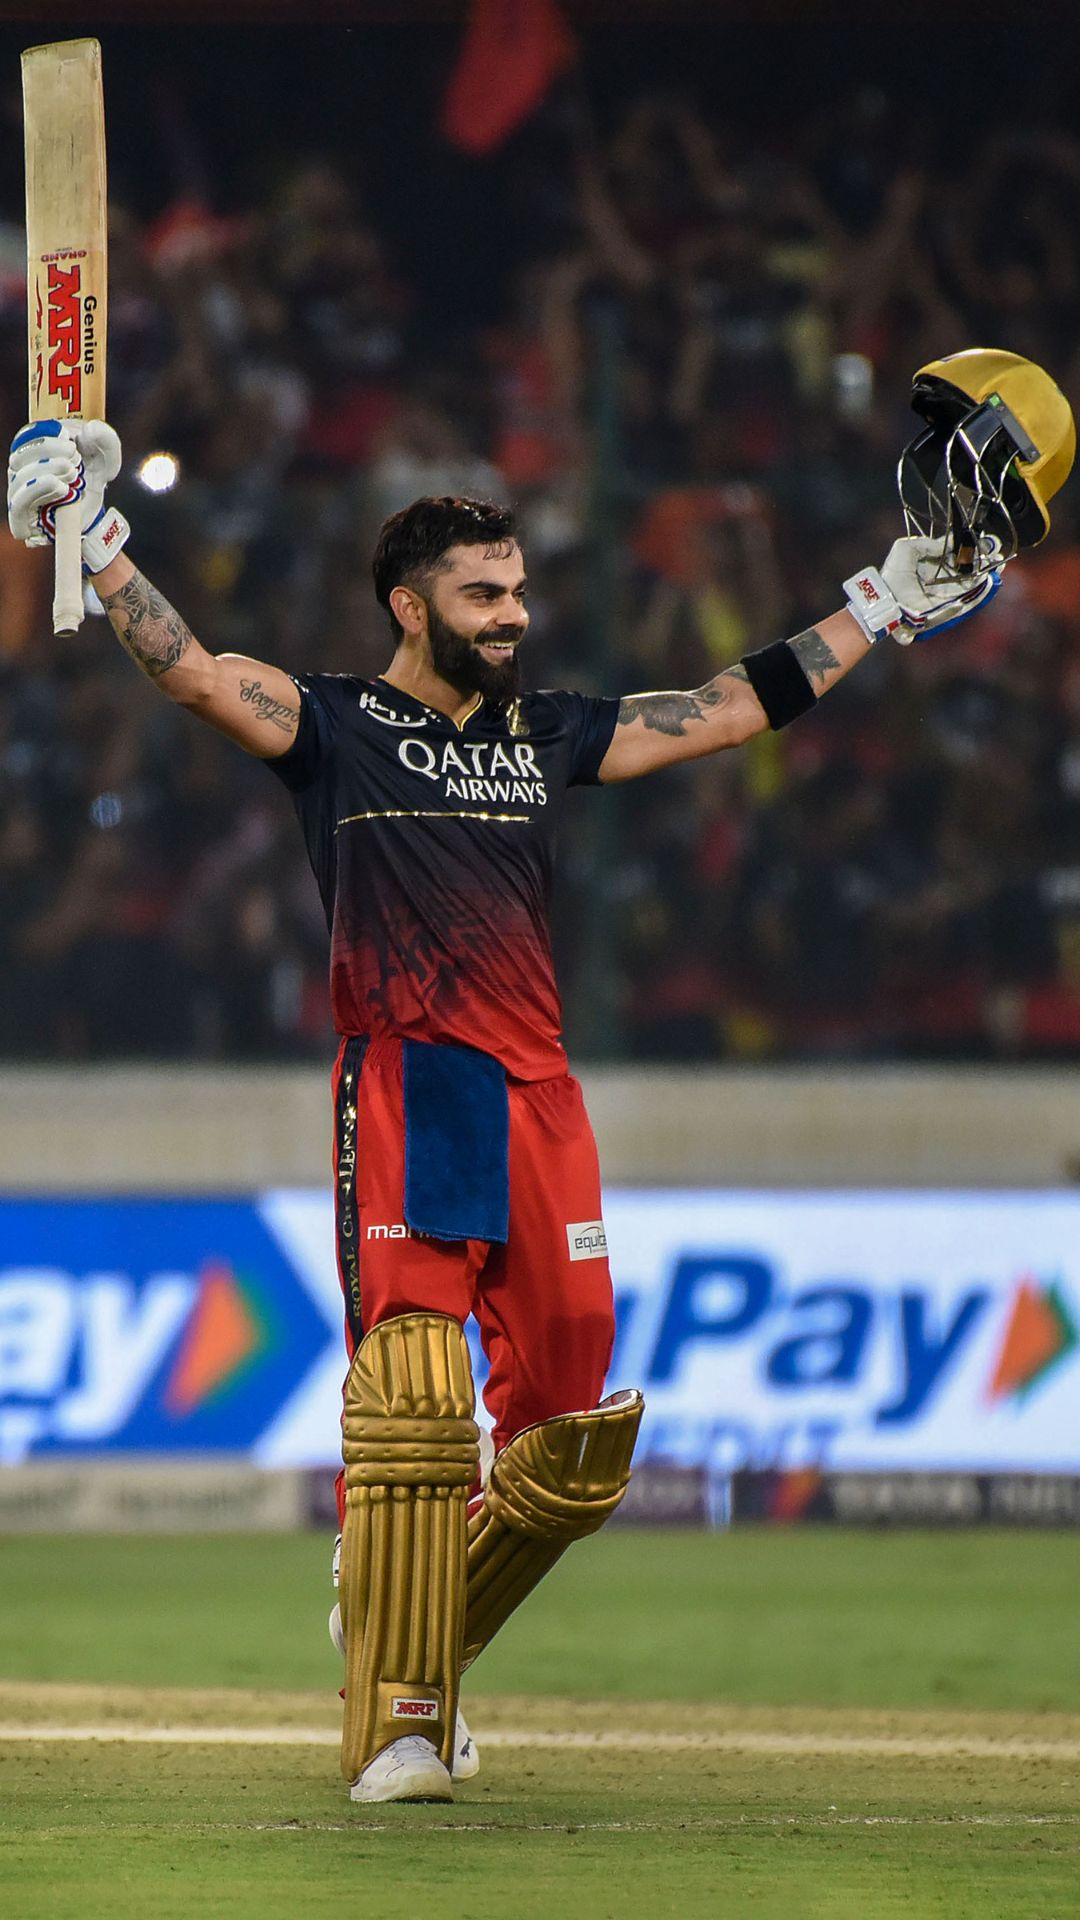 From Virat Kohli to Babar Azam, players to register most 50+ scores as captain in T20s